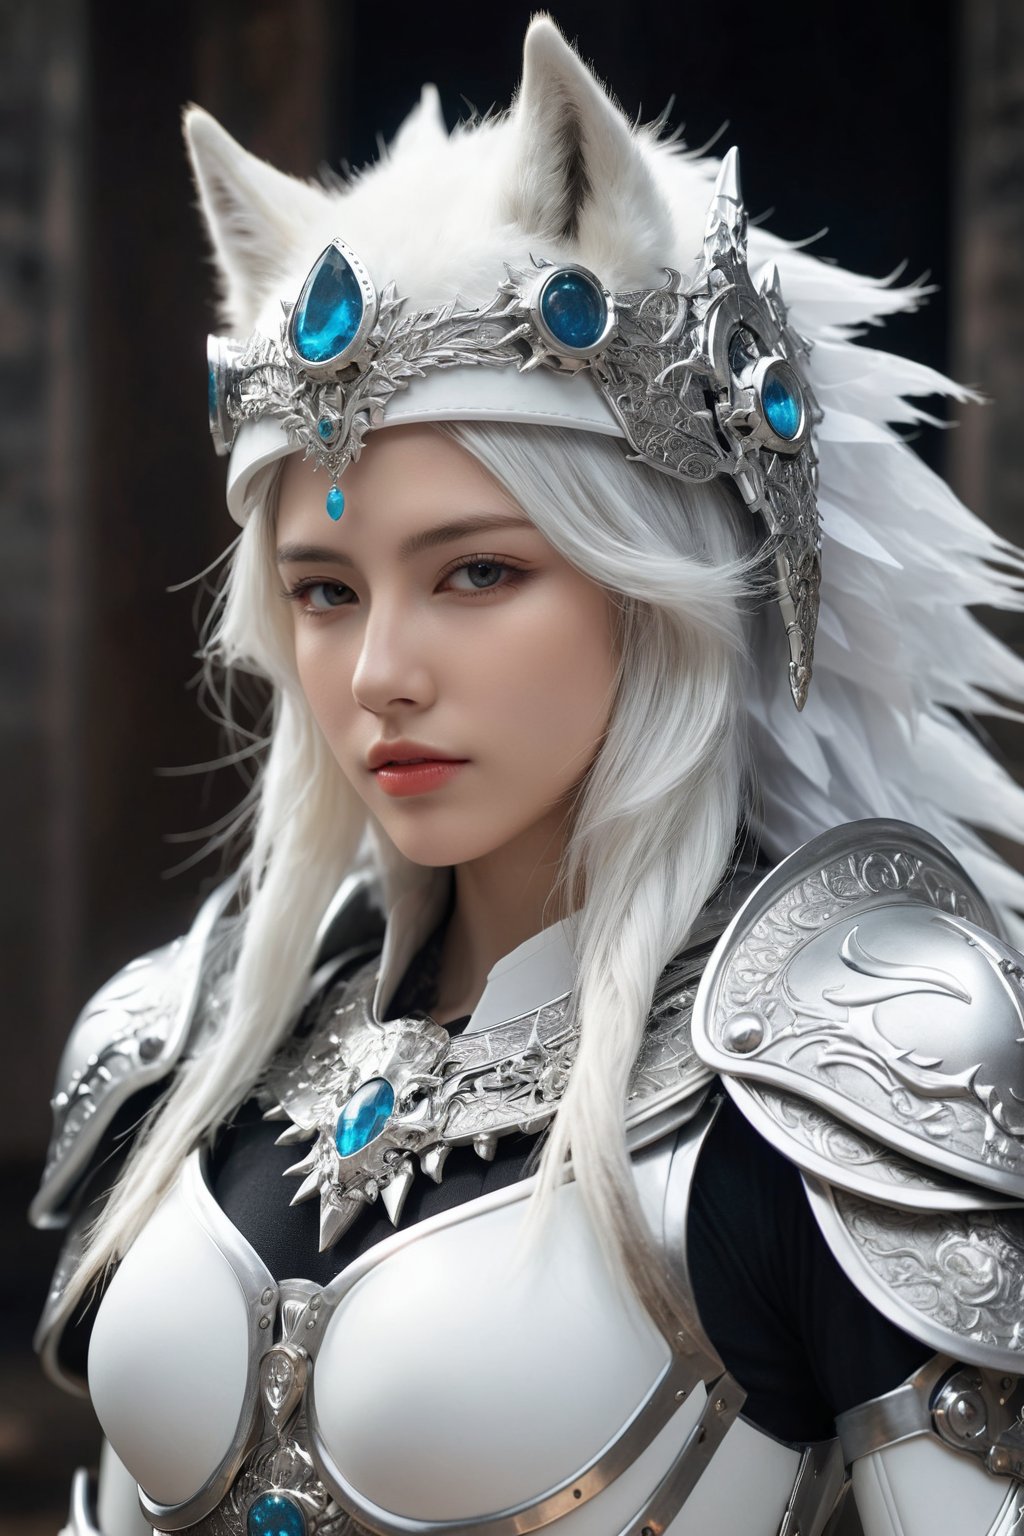 (ultra realistic,best quality),photorealistic,Extremely Realistic, in depth, cinematic light,hubgwomen,hubg_beauty_girl,

HUBG_Mecha_Armor, official art, full body, (Extremely beautiful hubggirl,, White Wolf queen, white Wolf_girl, crown (headgear):1.3), Wolf Head, Wolf_girl, Moon.solo, hanfu, Majestic. Solemn, white wolf's head at the shoulders, wolf's ears, (white medieval byzantine theme), cowboy shot, (alive skin),HUBGGIRL

intricate background, realism,realistic,raw,analog,portrait,photorealistic, HUBG_Mecha_Armor